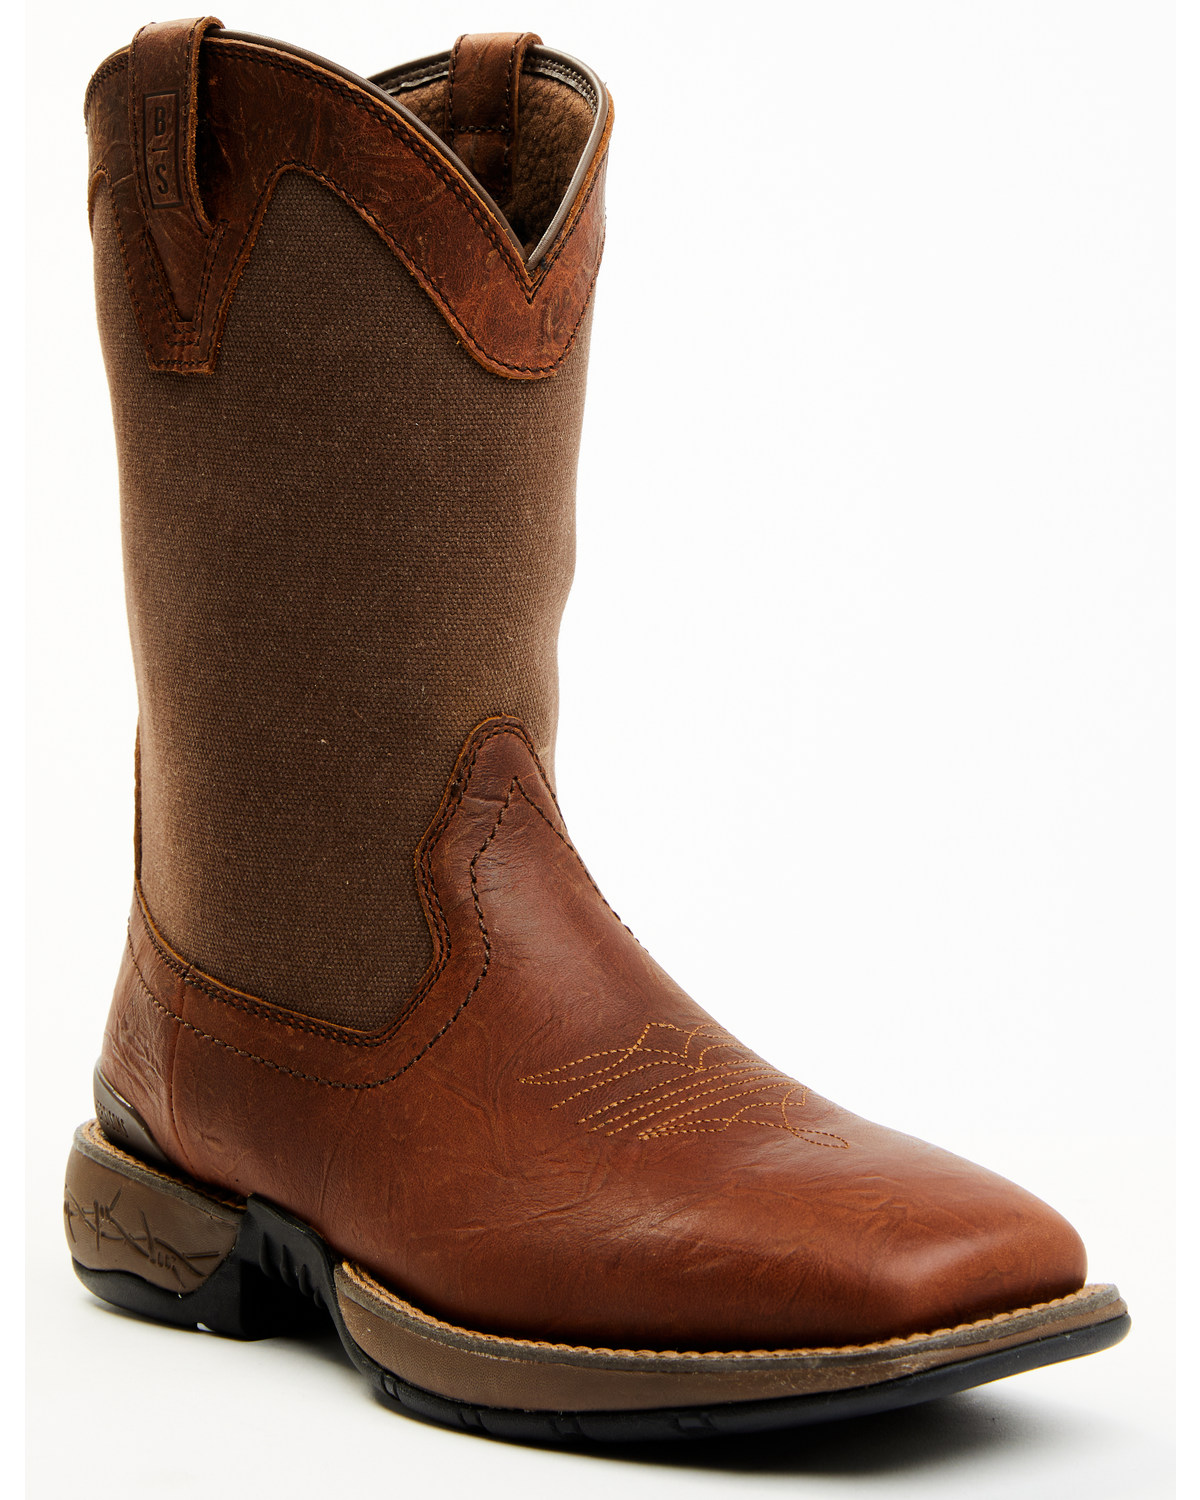 Brothers and Sons Men's Xero Gravity Lite Western Performance Boots